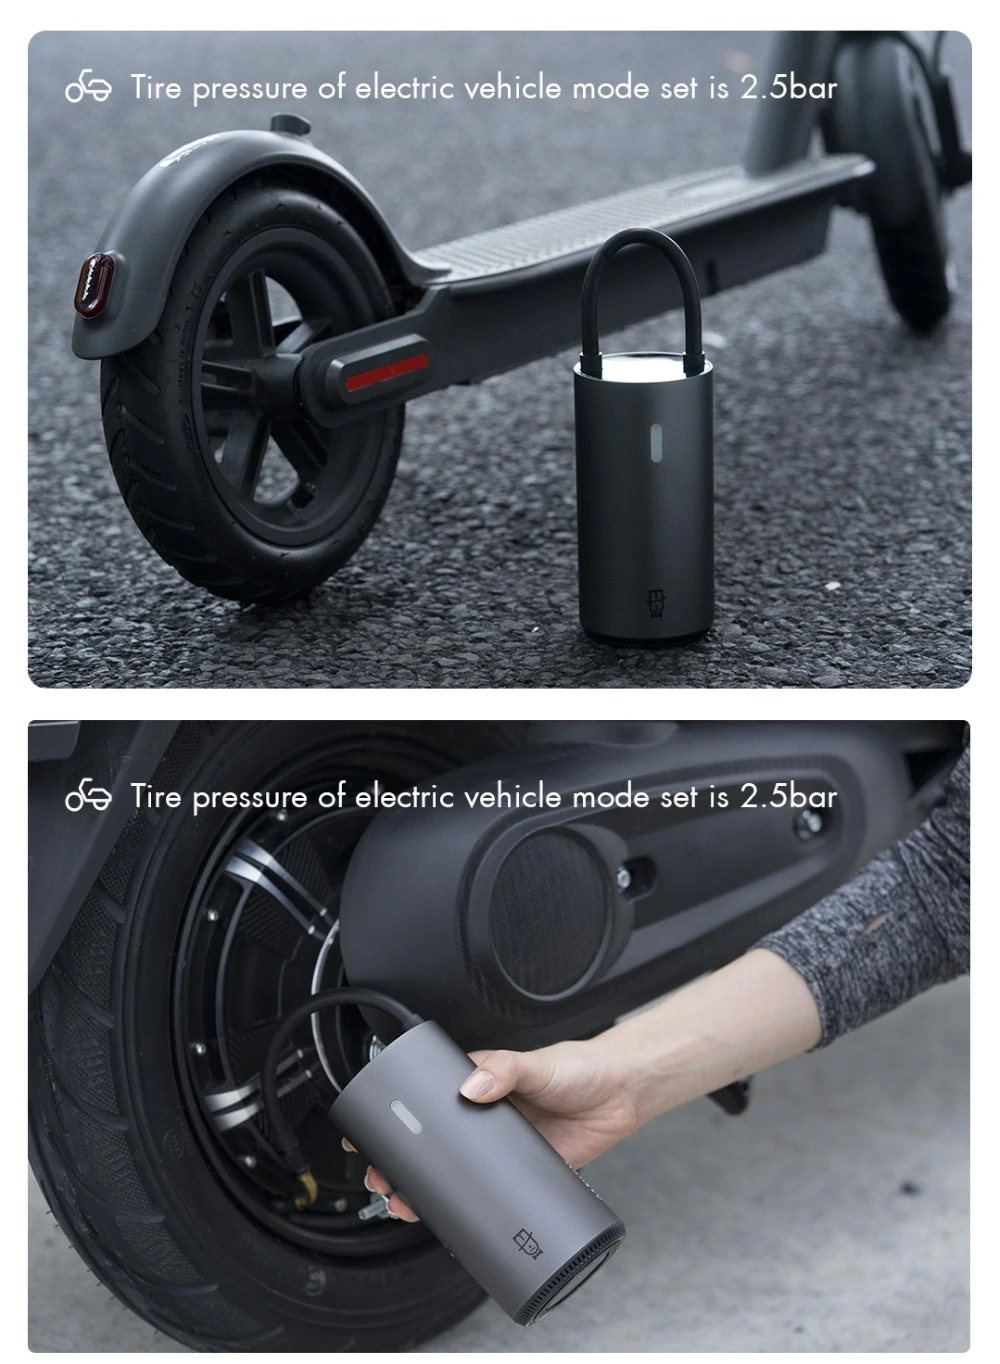 Tire pressure of electric vehicle mode set is 2.5bar